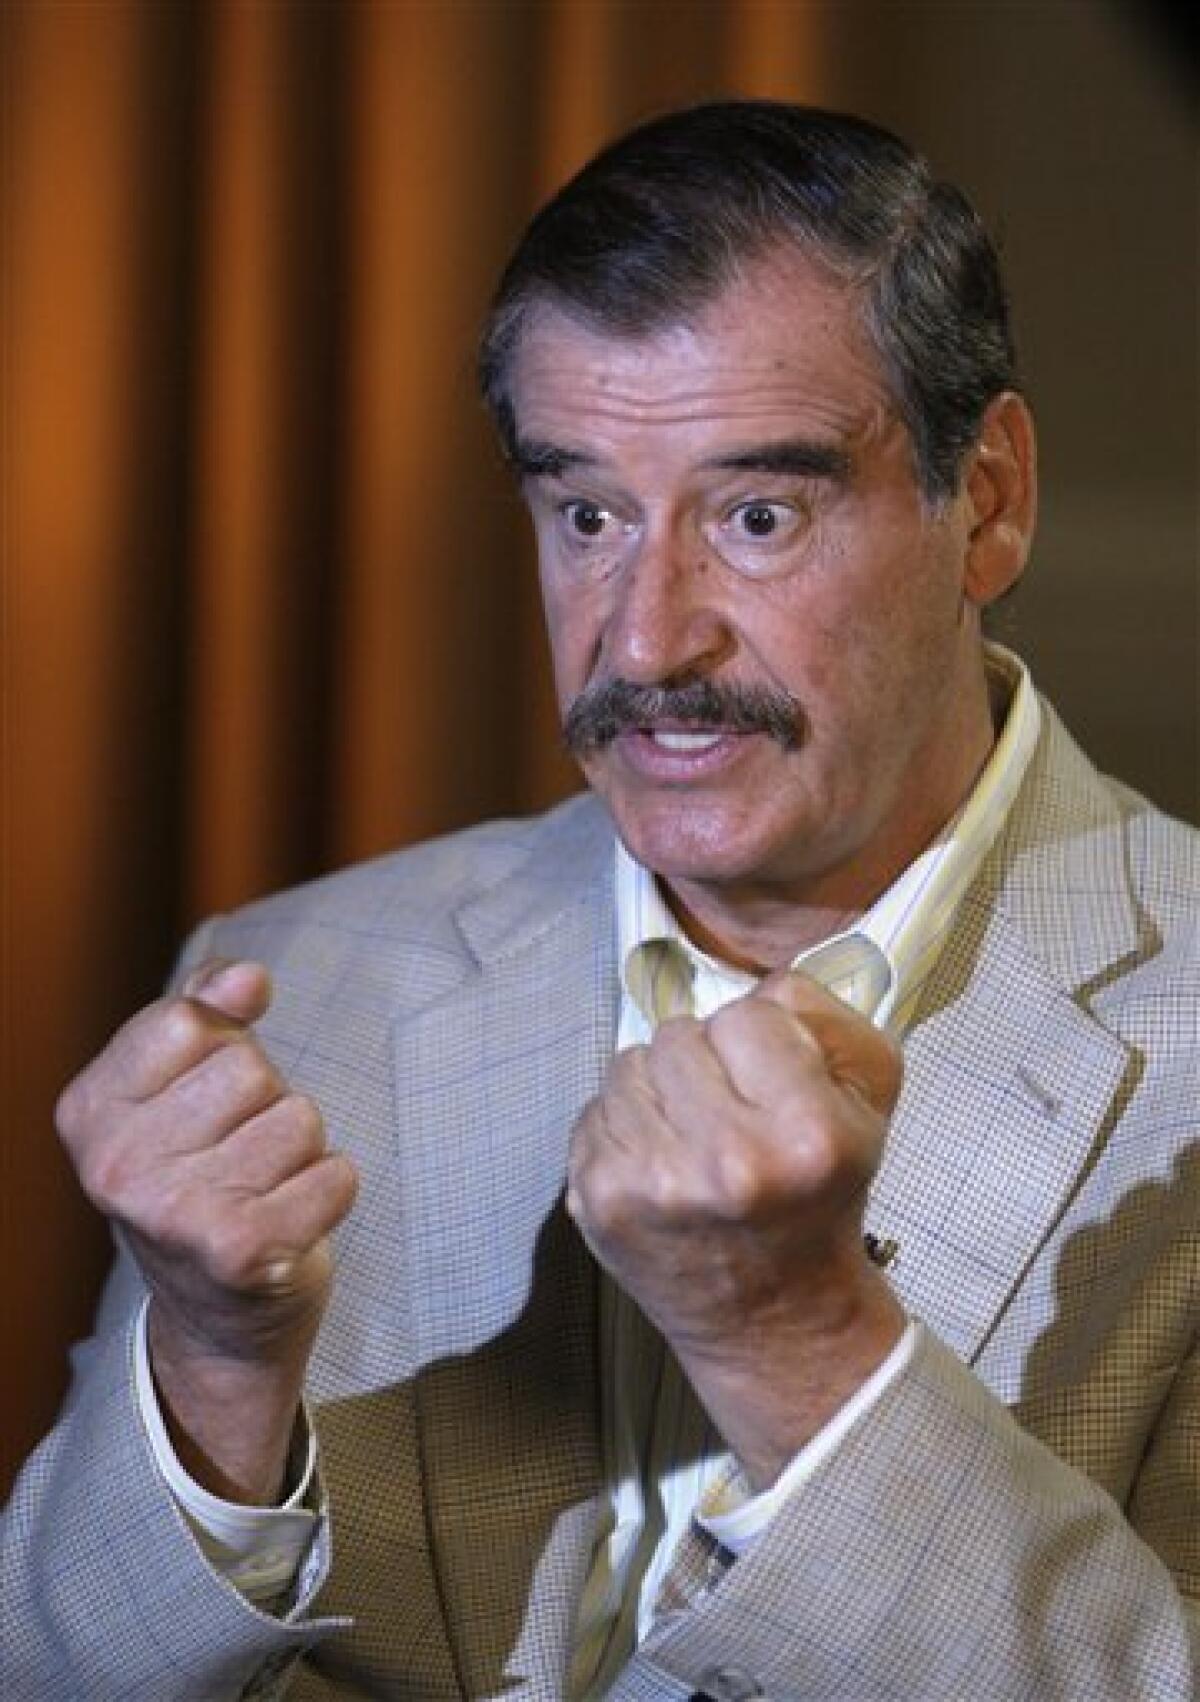 Former Mexican President Vicente Fox speaks during an interview in Kennesaw, Ga., on Tuesday, May 12, 2009. (AP Photo/John Bazemore)